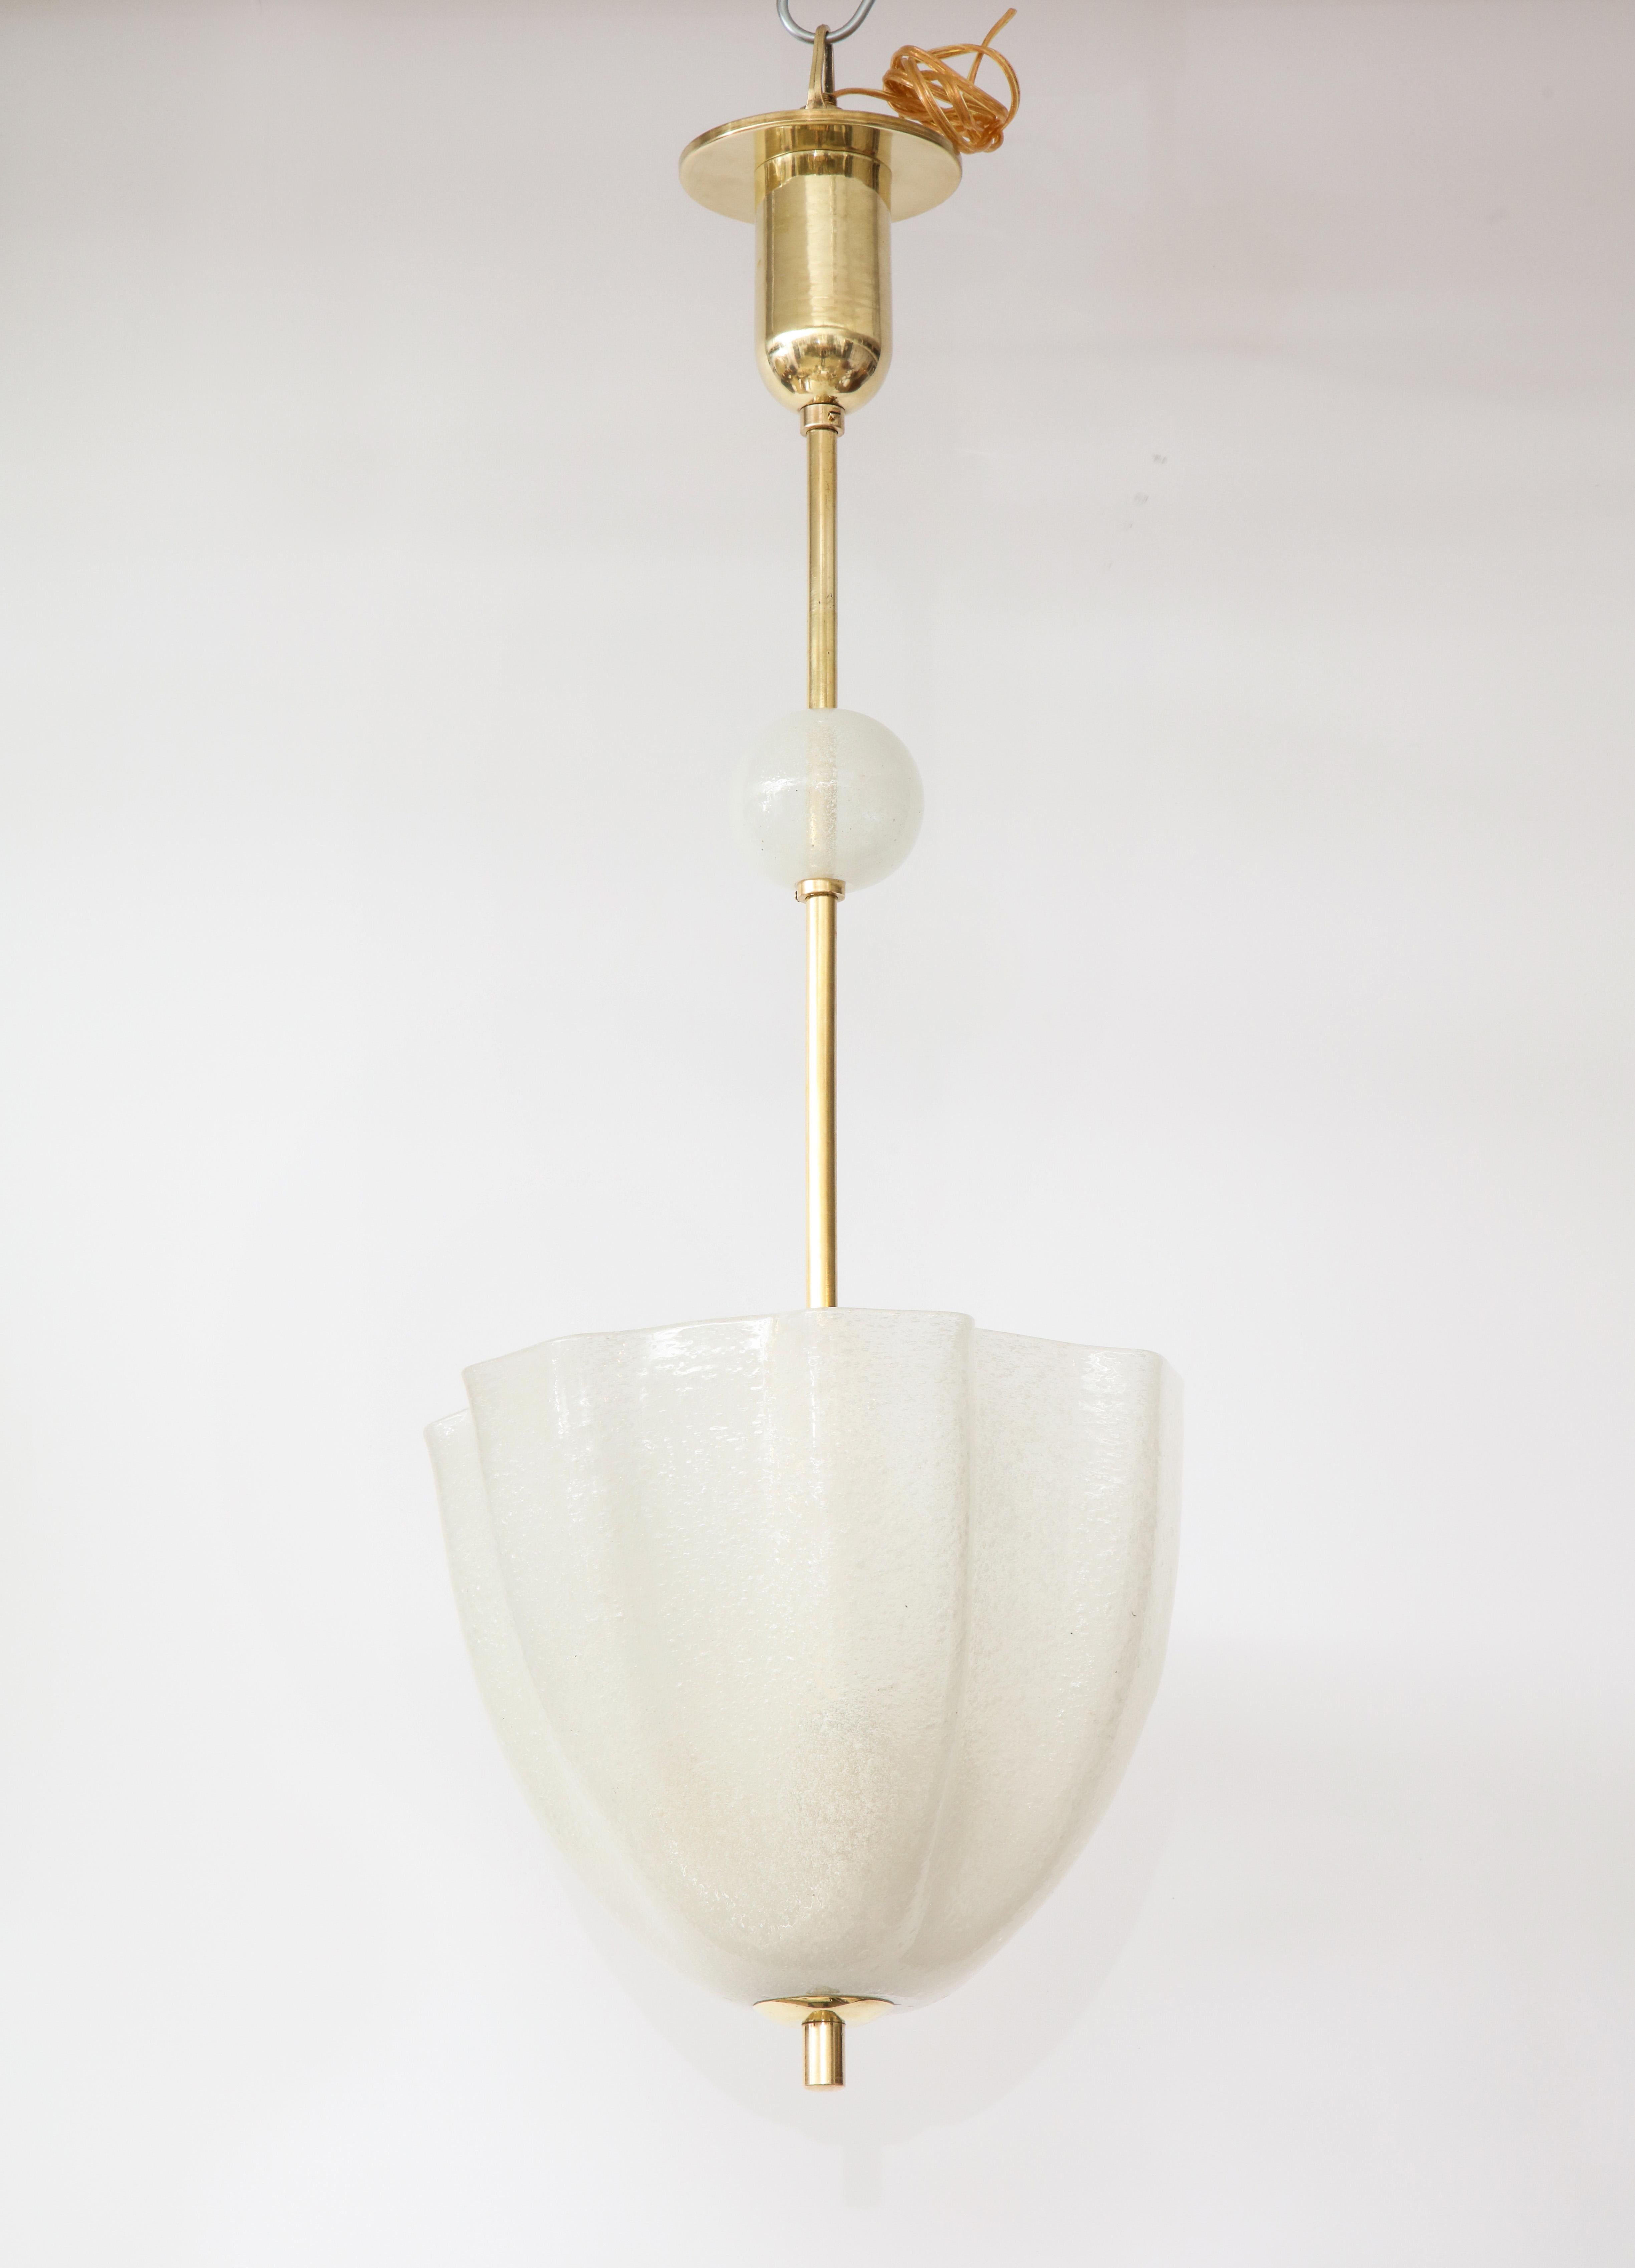 Venini tulip shaped frosted opaline glass pendant with brass columnar support and canopy with circular adjustable opaline glass globe on brass stem. (Re-wired for USA standards).
Venice, Italy, 1940s
Size: 32